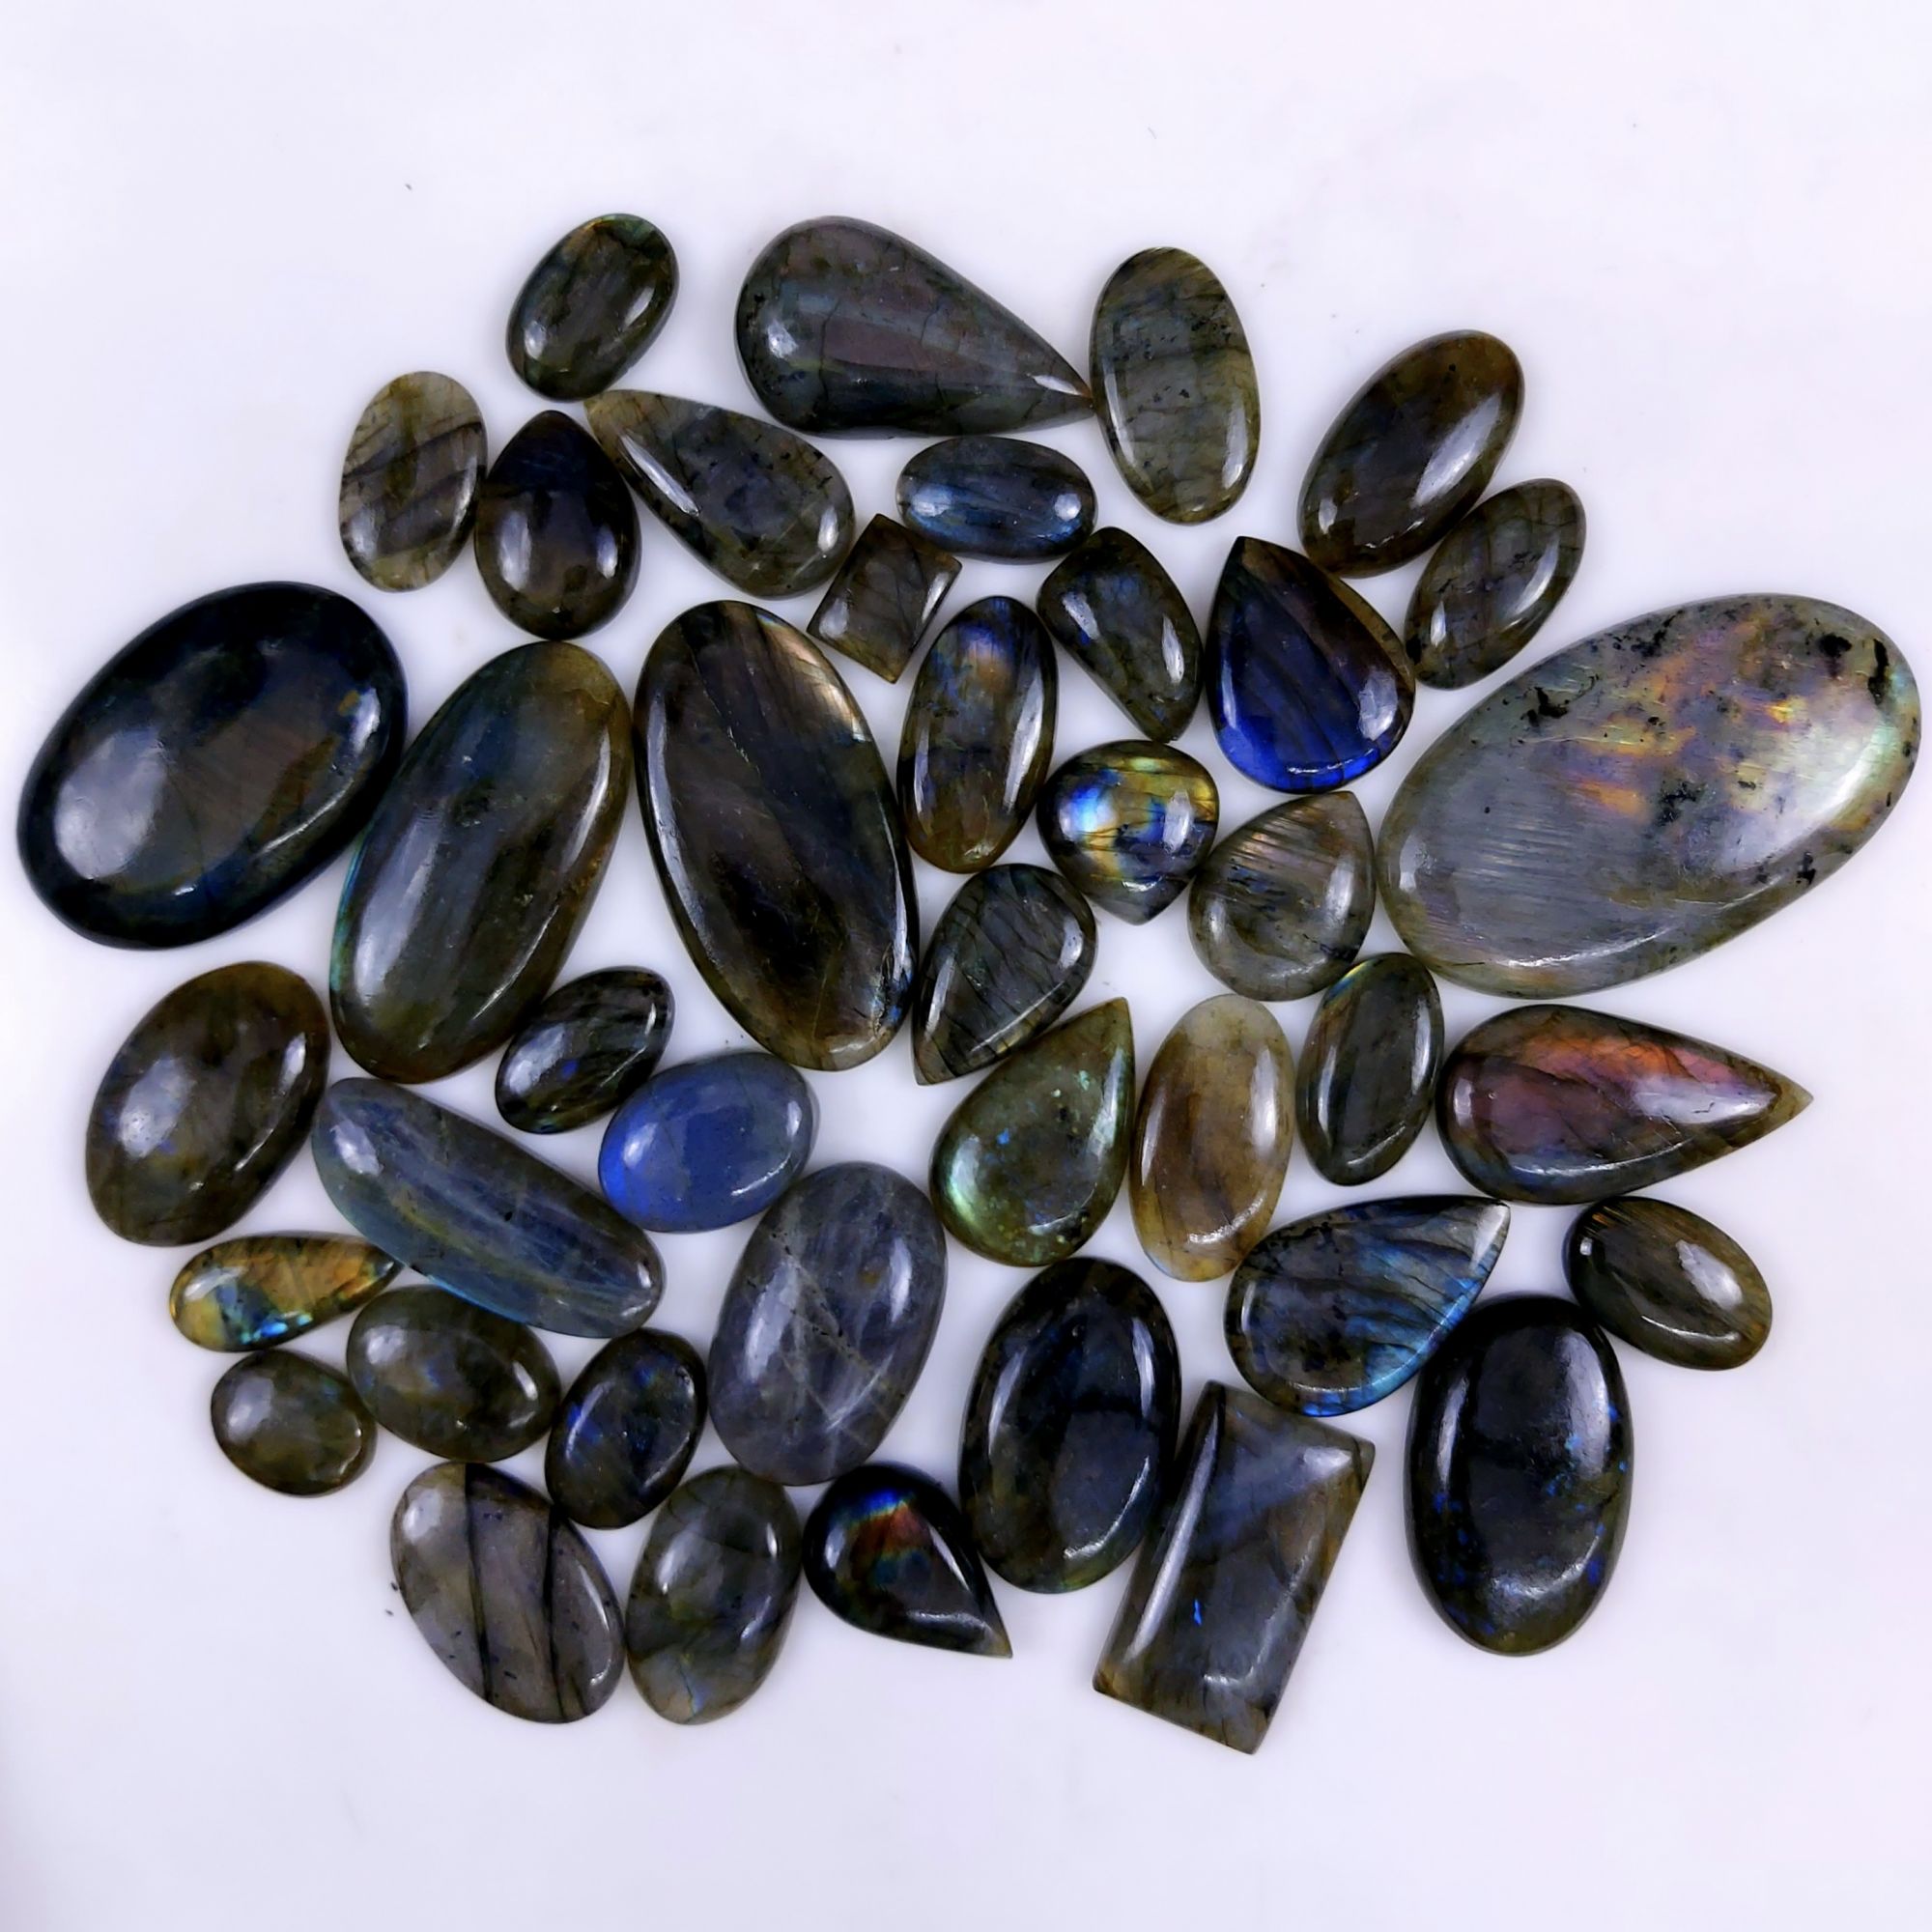 41pc 1612Cts Labradorite Cabochon Multifire Healing Crystal For Jewelry Supplies, Labradorite Necklace Handmade Wire Wrapped Gemstone Pendant 48x34 22x14mm#6352